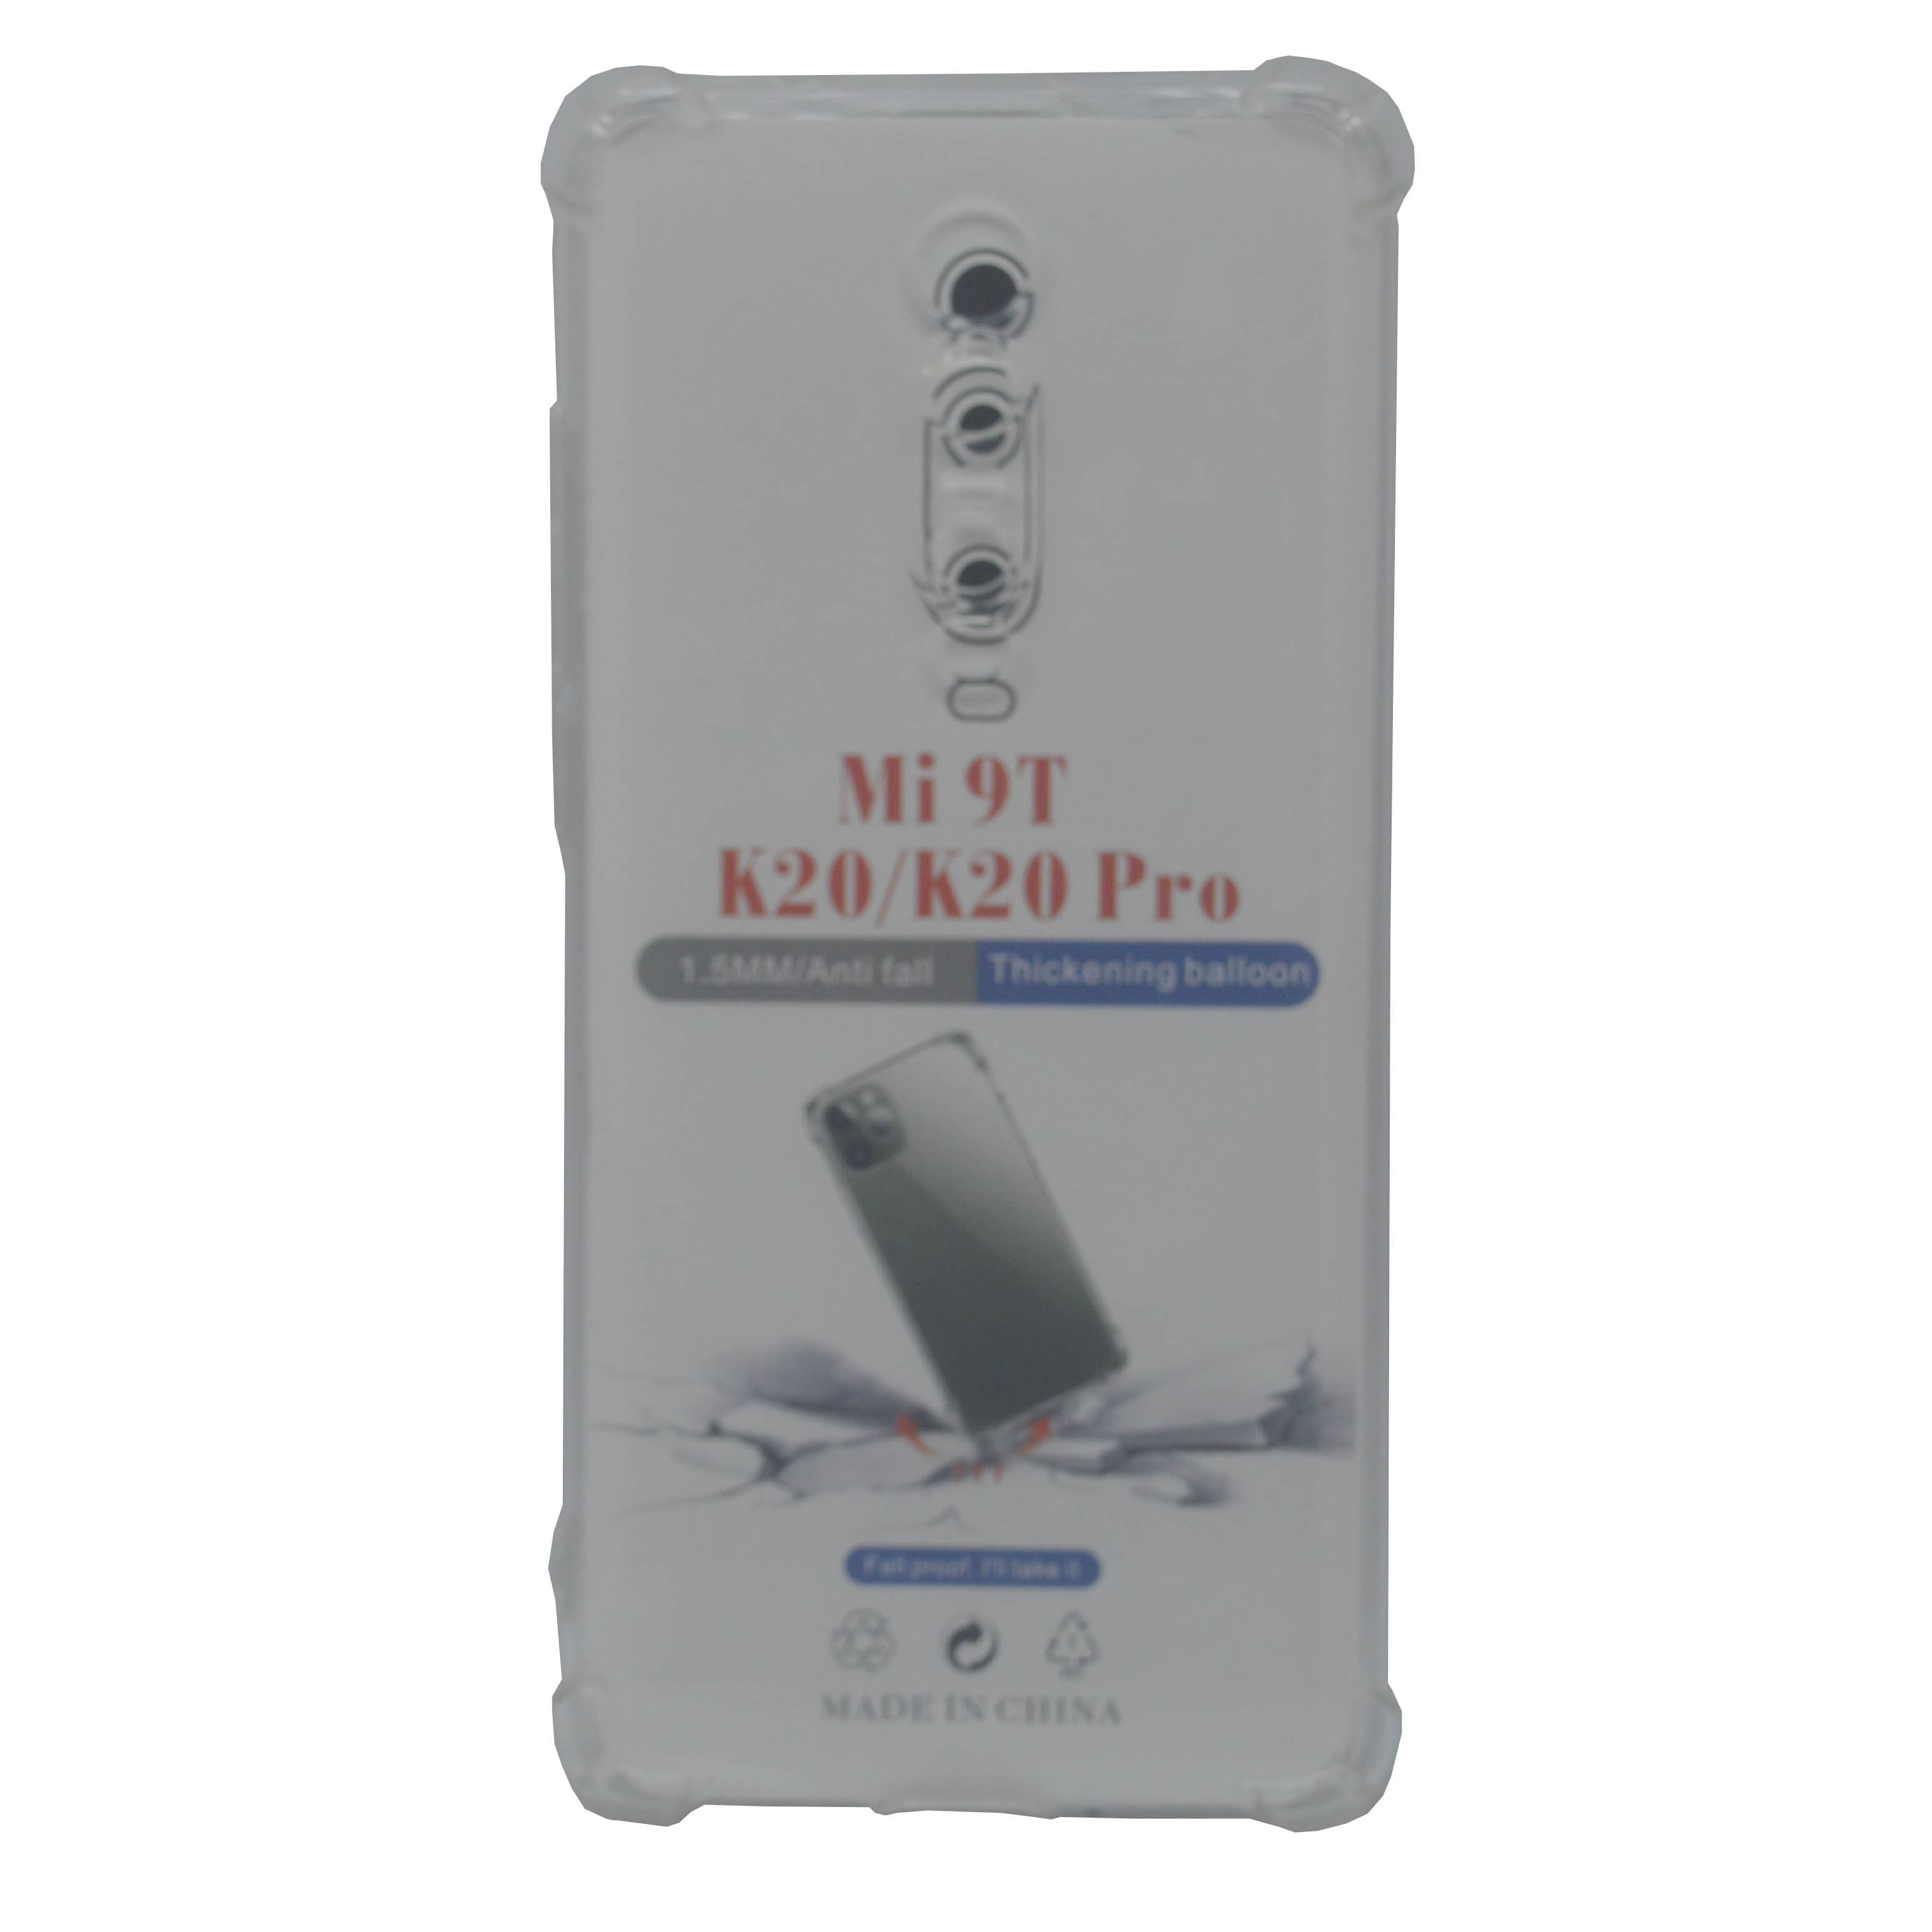 Redmi 9T K20-K20Pro Integration Camera Protection, Crystal Clear Transparent Cover Case